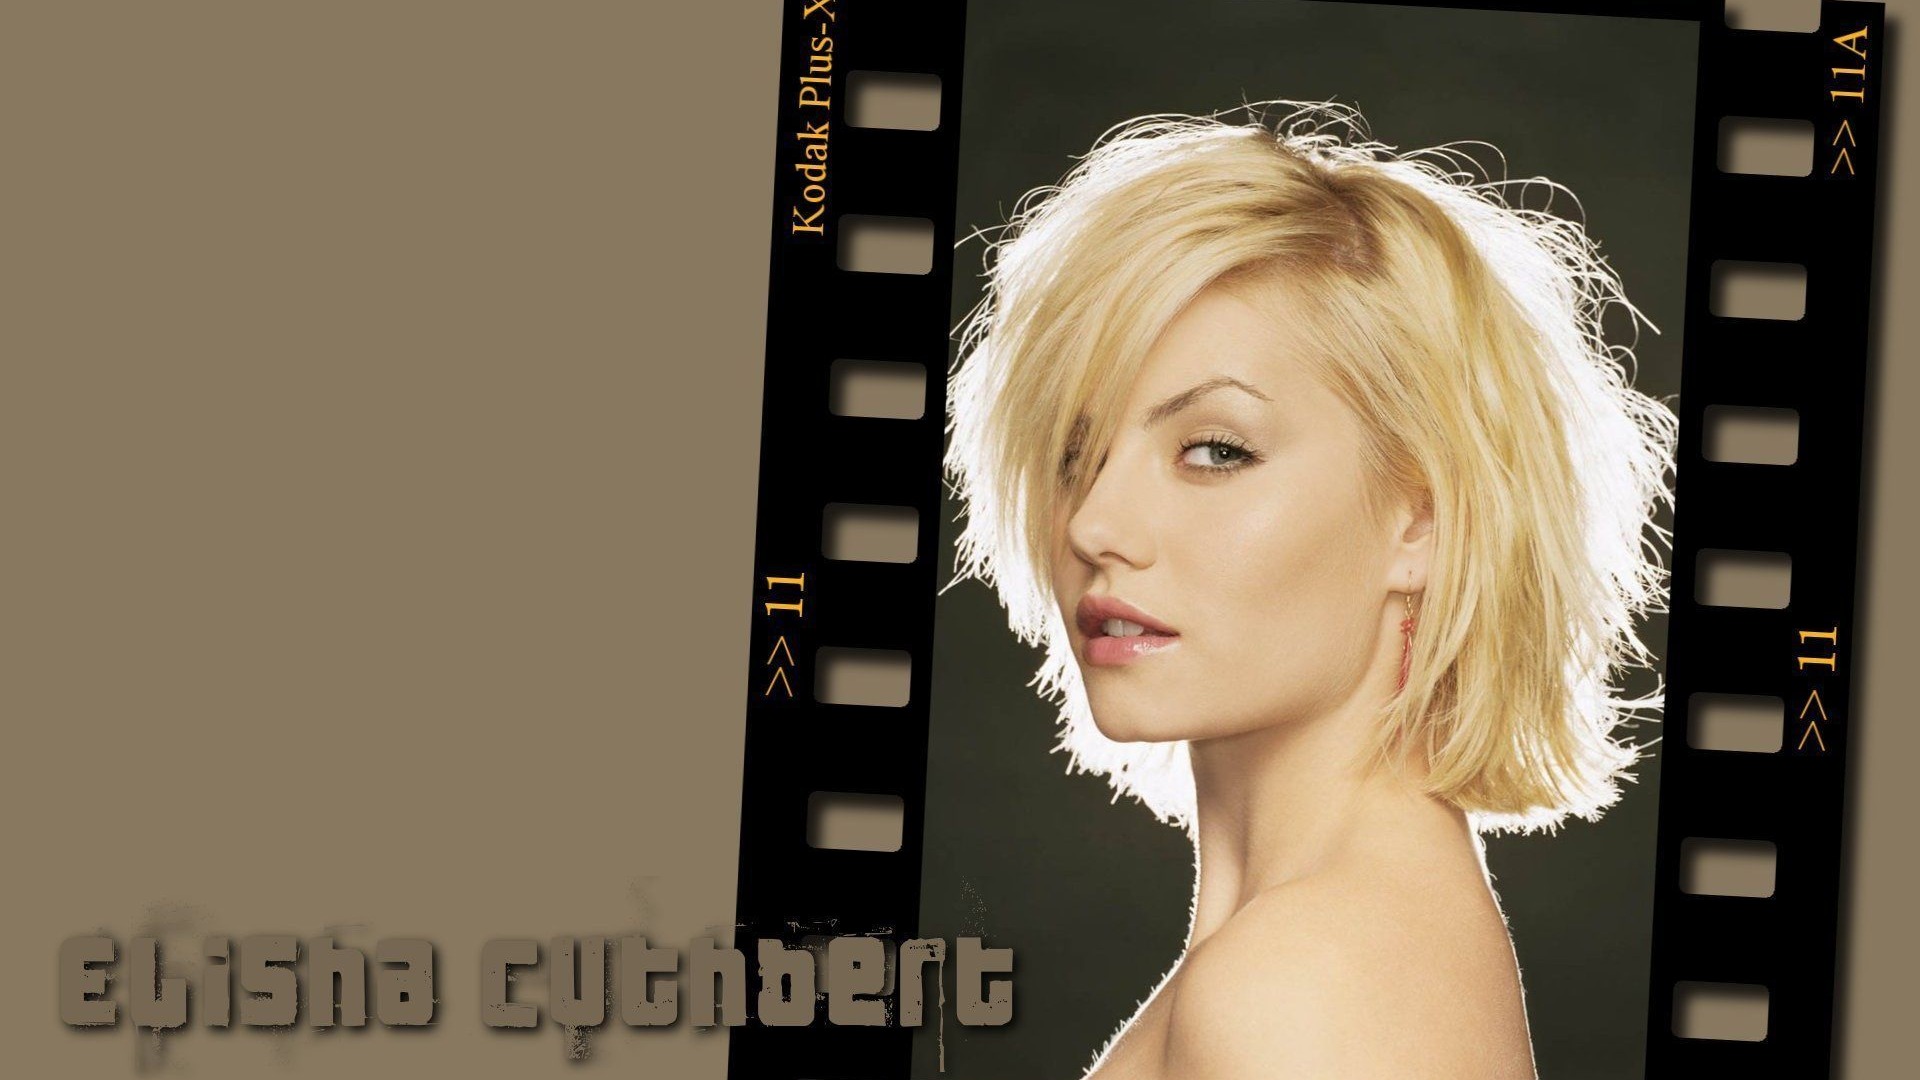 Elisha Cuthbert #009 - 1920x1080 Wallpapers Pictures Photos Images